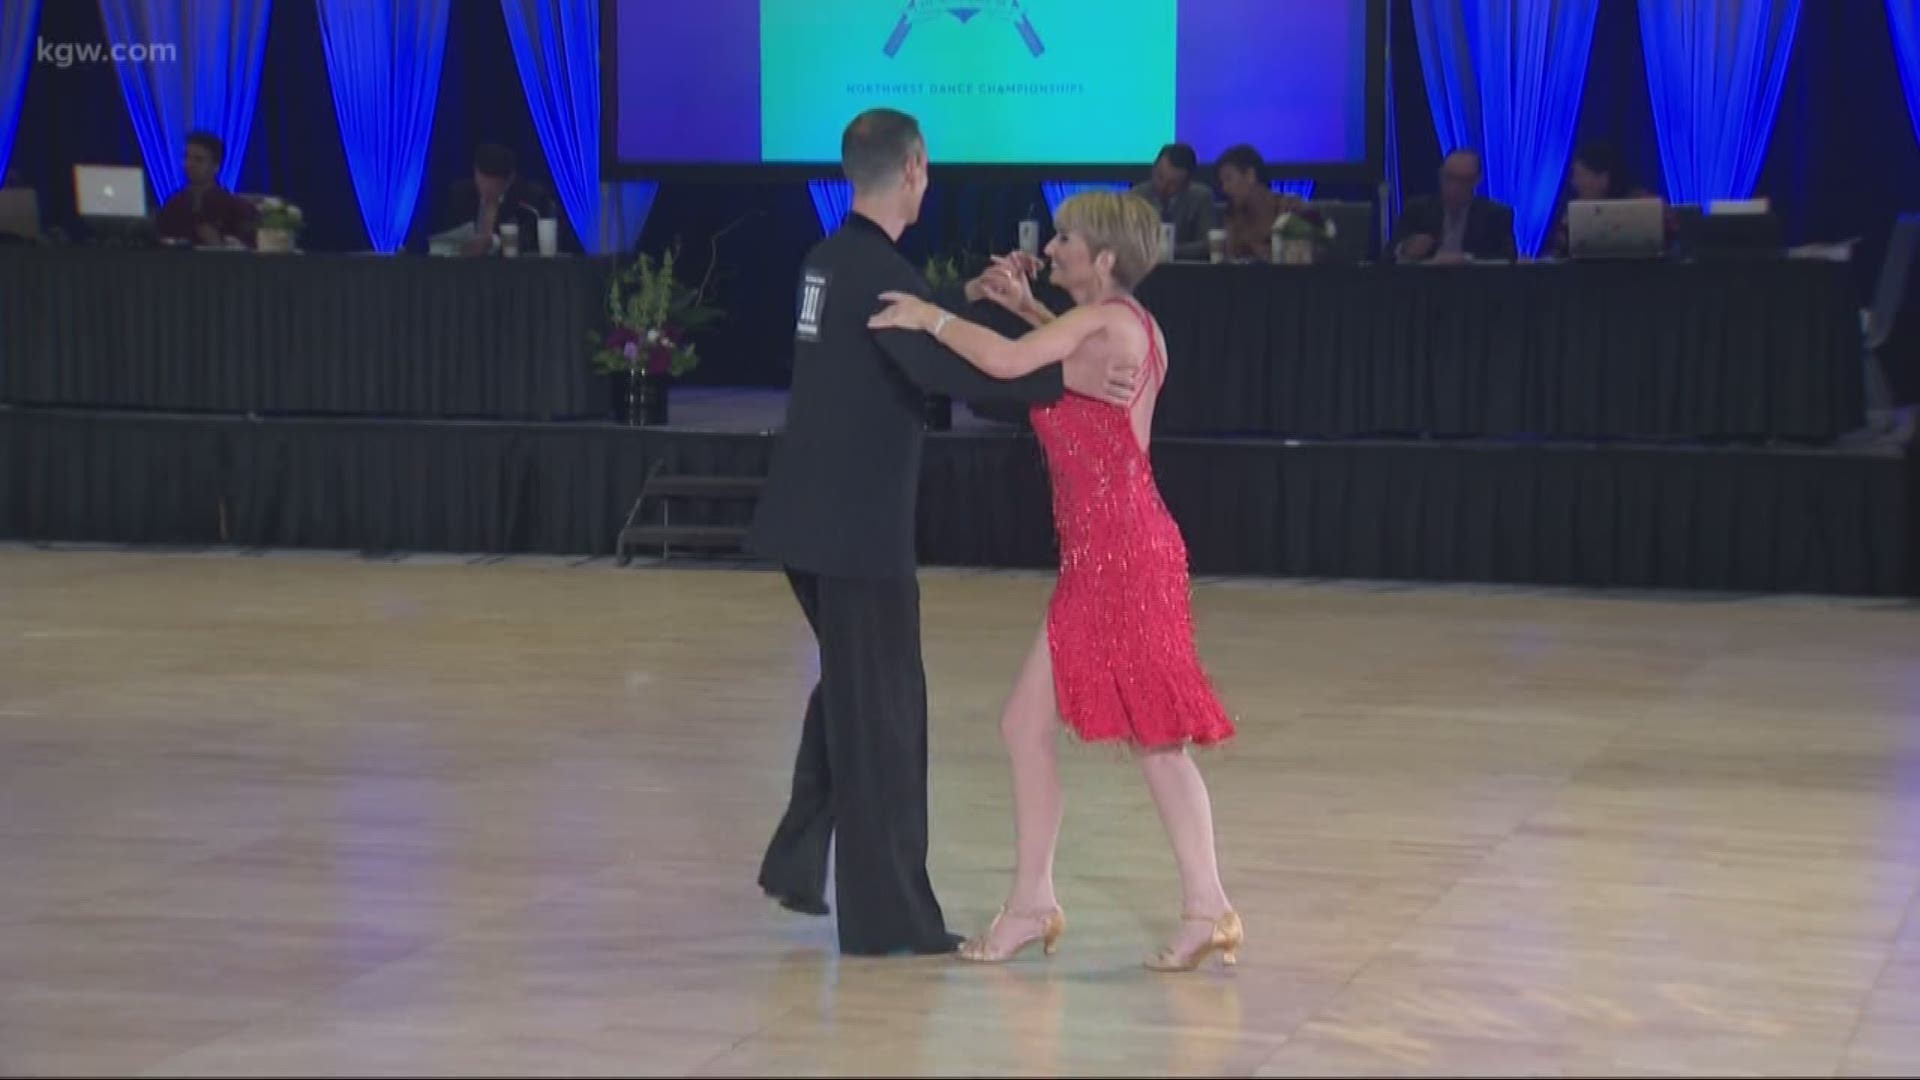 Dancers from all over the region are competing in the first ever Northwest Dance Championships this weekend. The Fred Astaire Dance Studio is hosting the vent. Tony Dovolani from Dancing With the Stars is the guest judge.